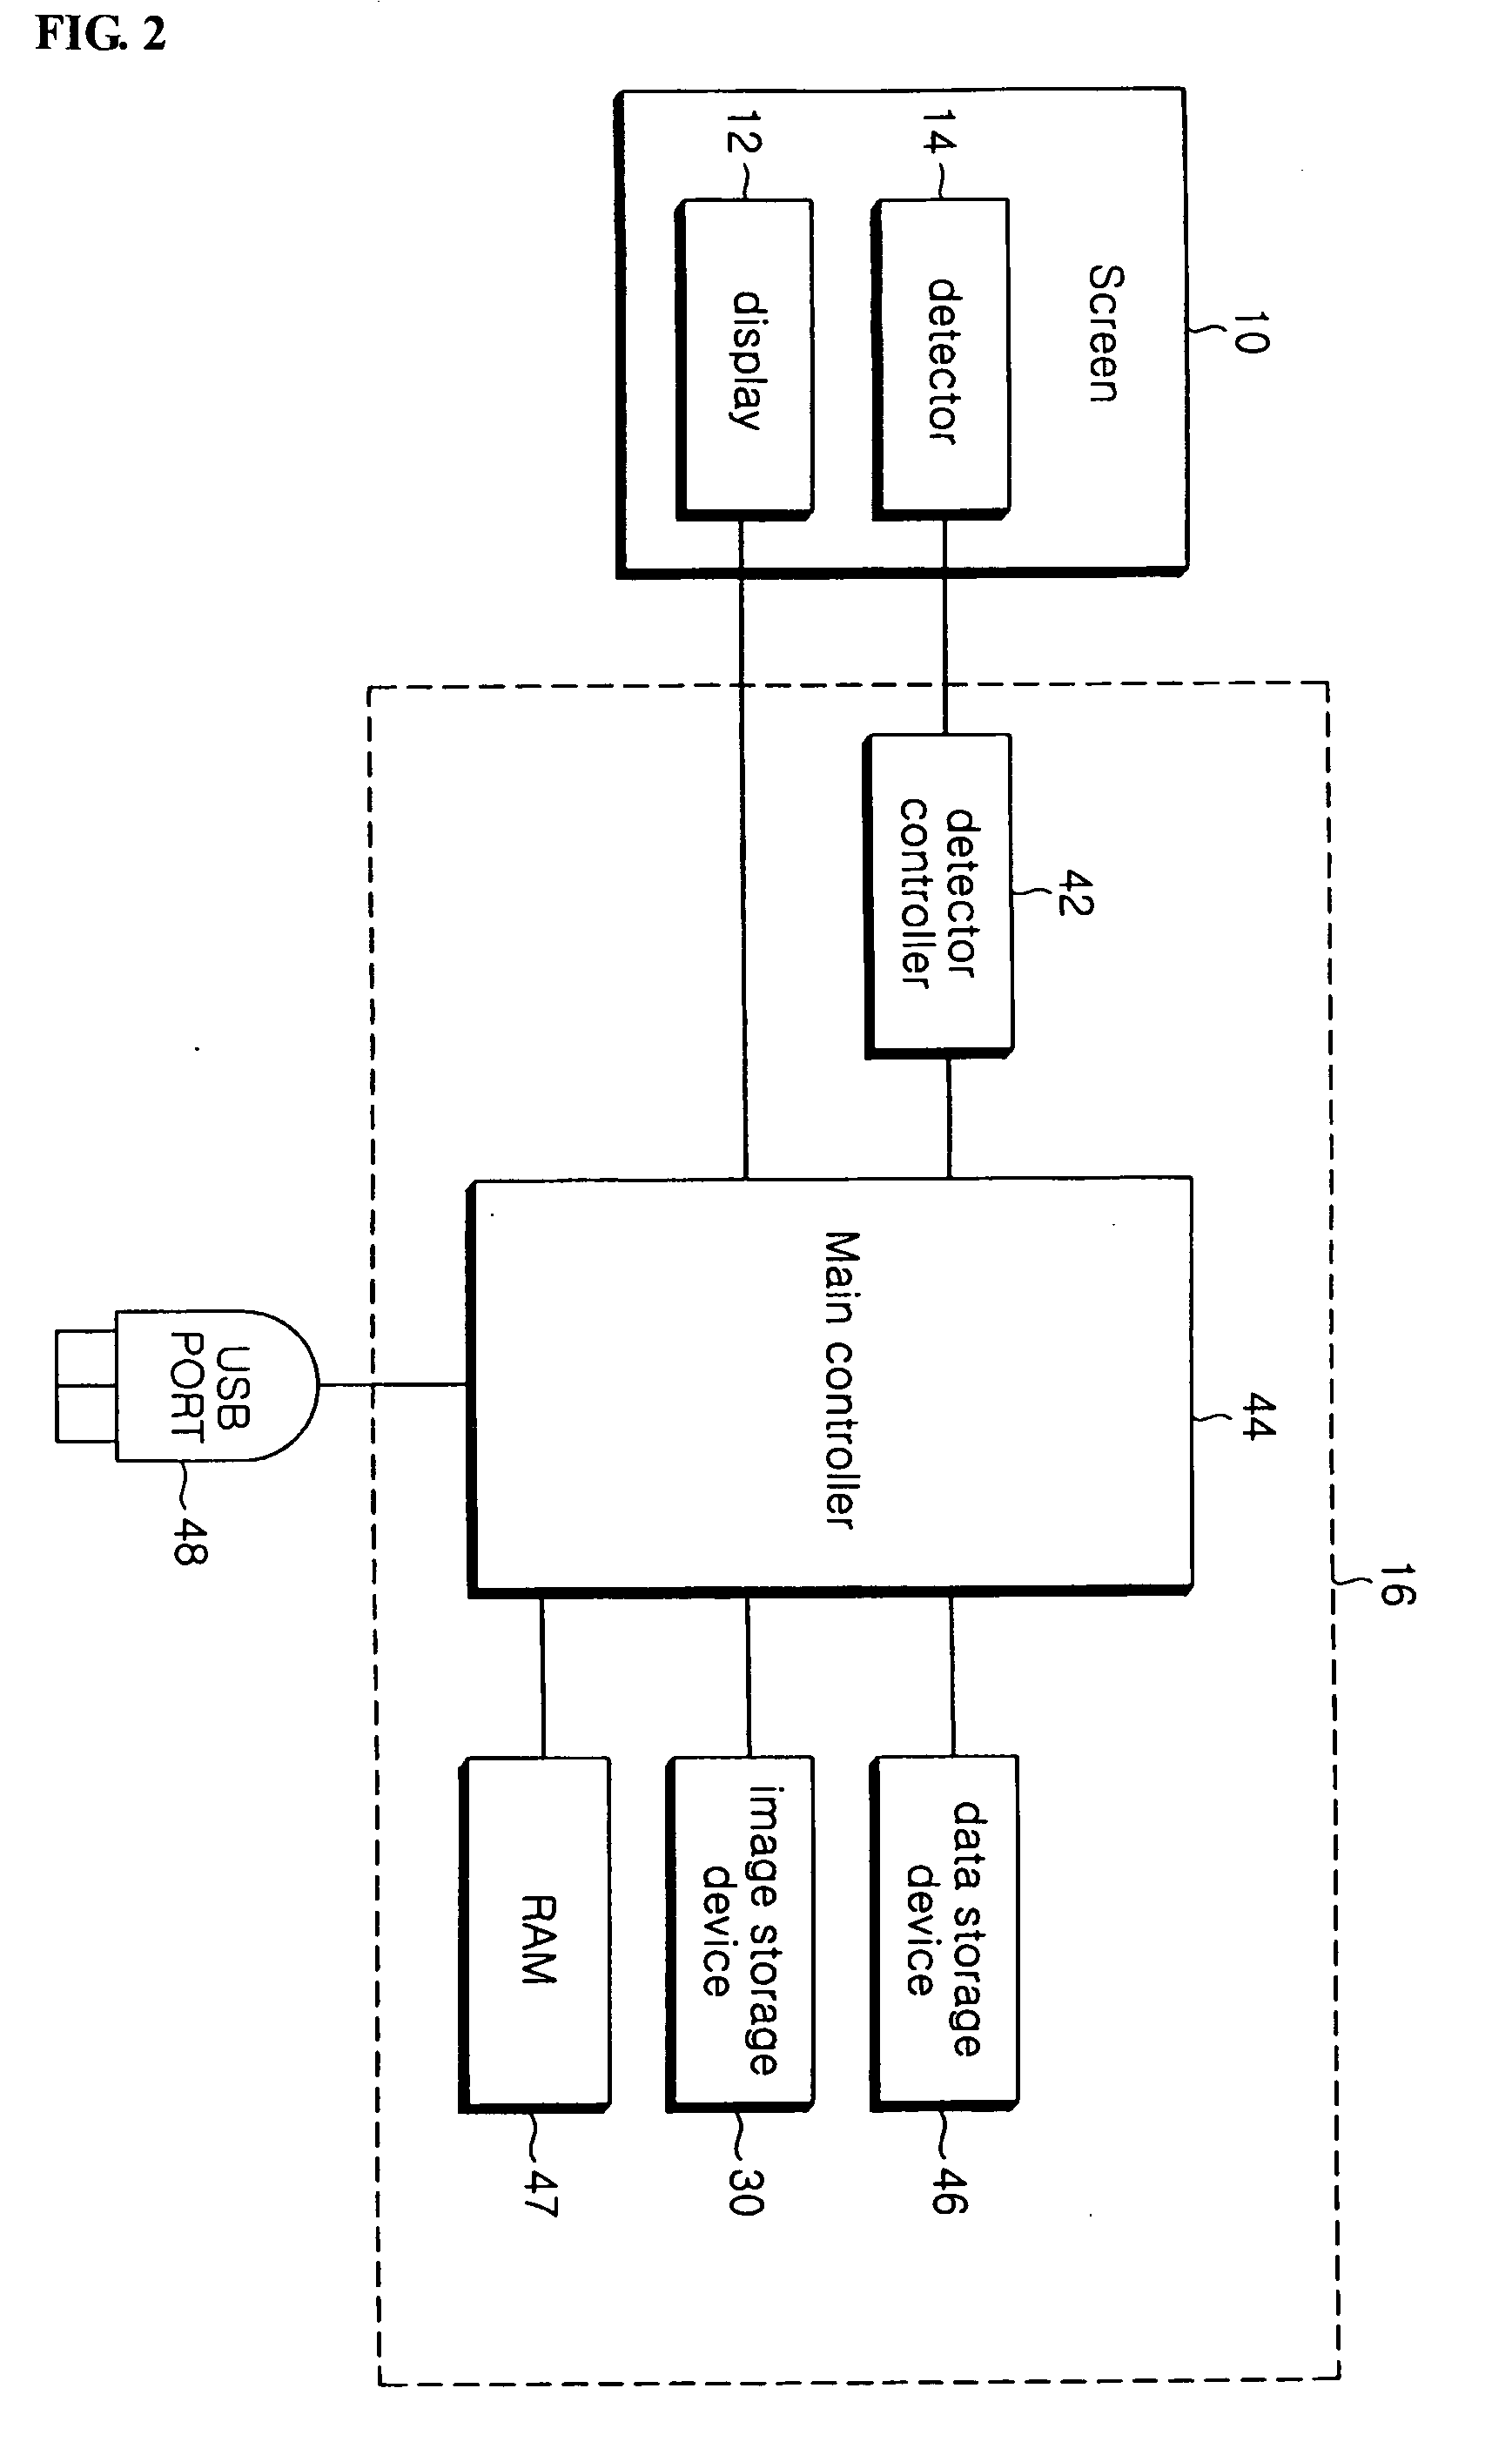 Touch screen device and method of displaying images thereon